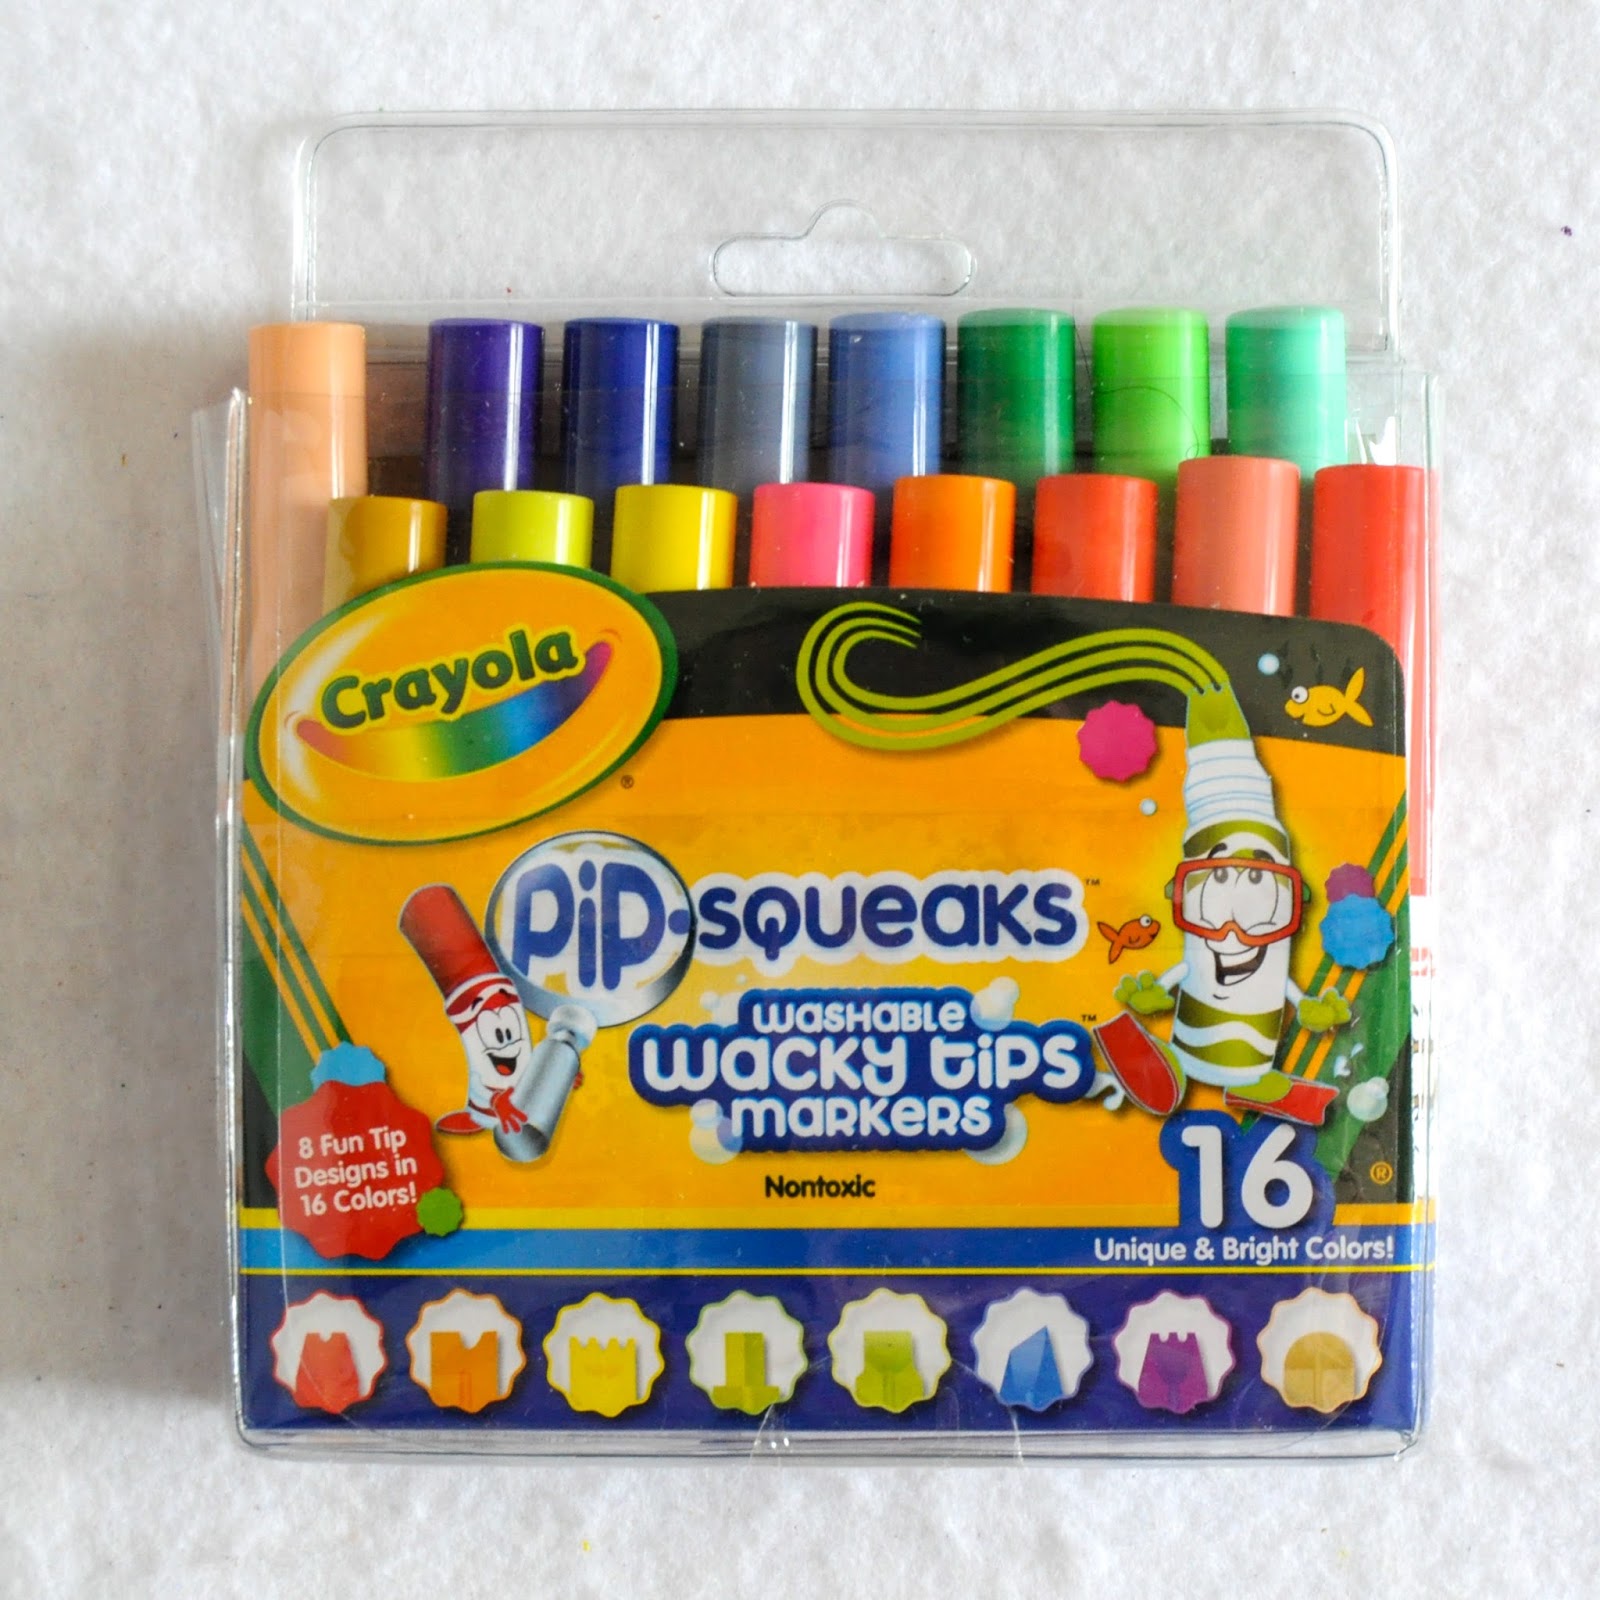 Crayola 16-count Pip-squeaks Markers 